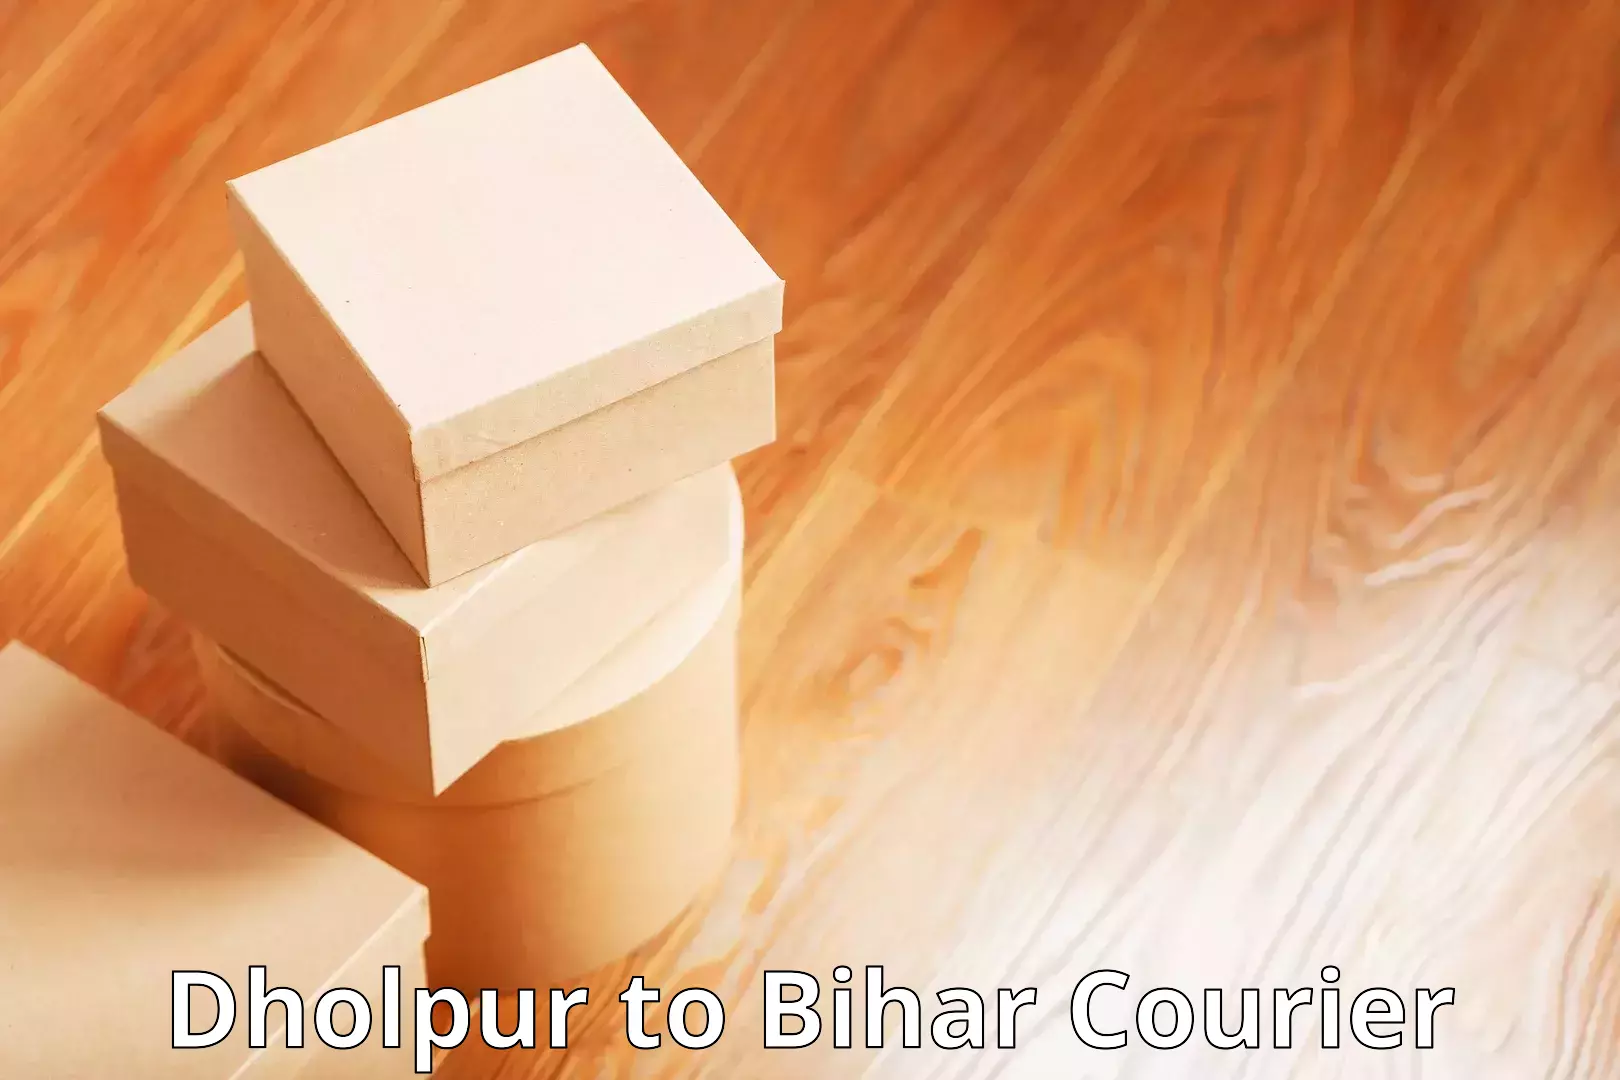 Next-day delivery options Dholpur to Bhorey